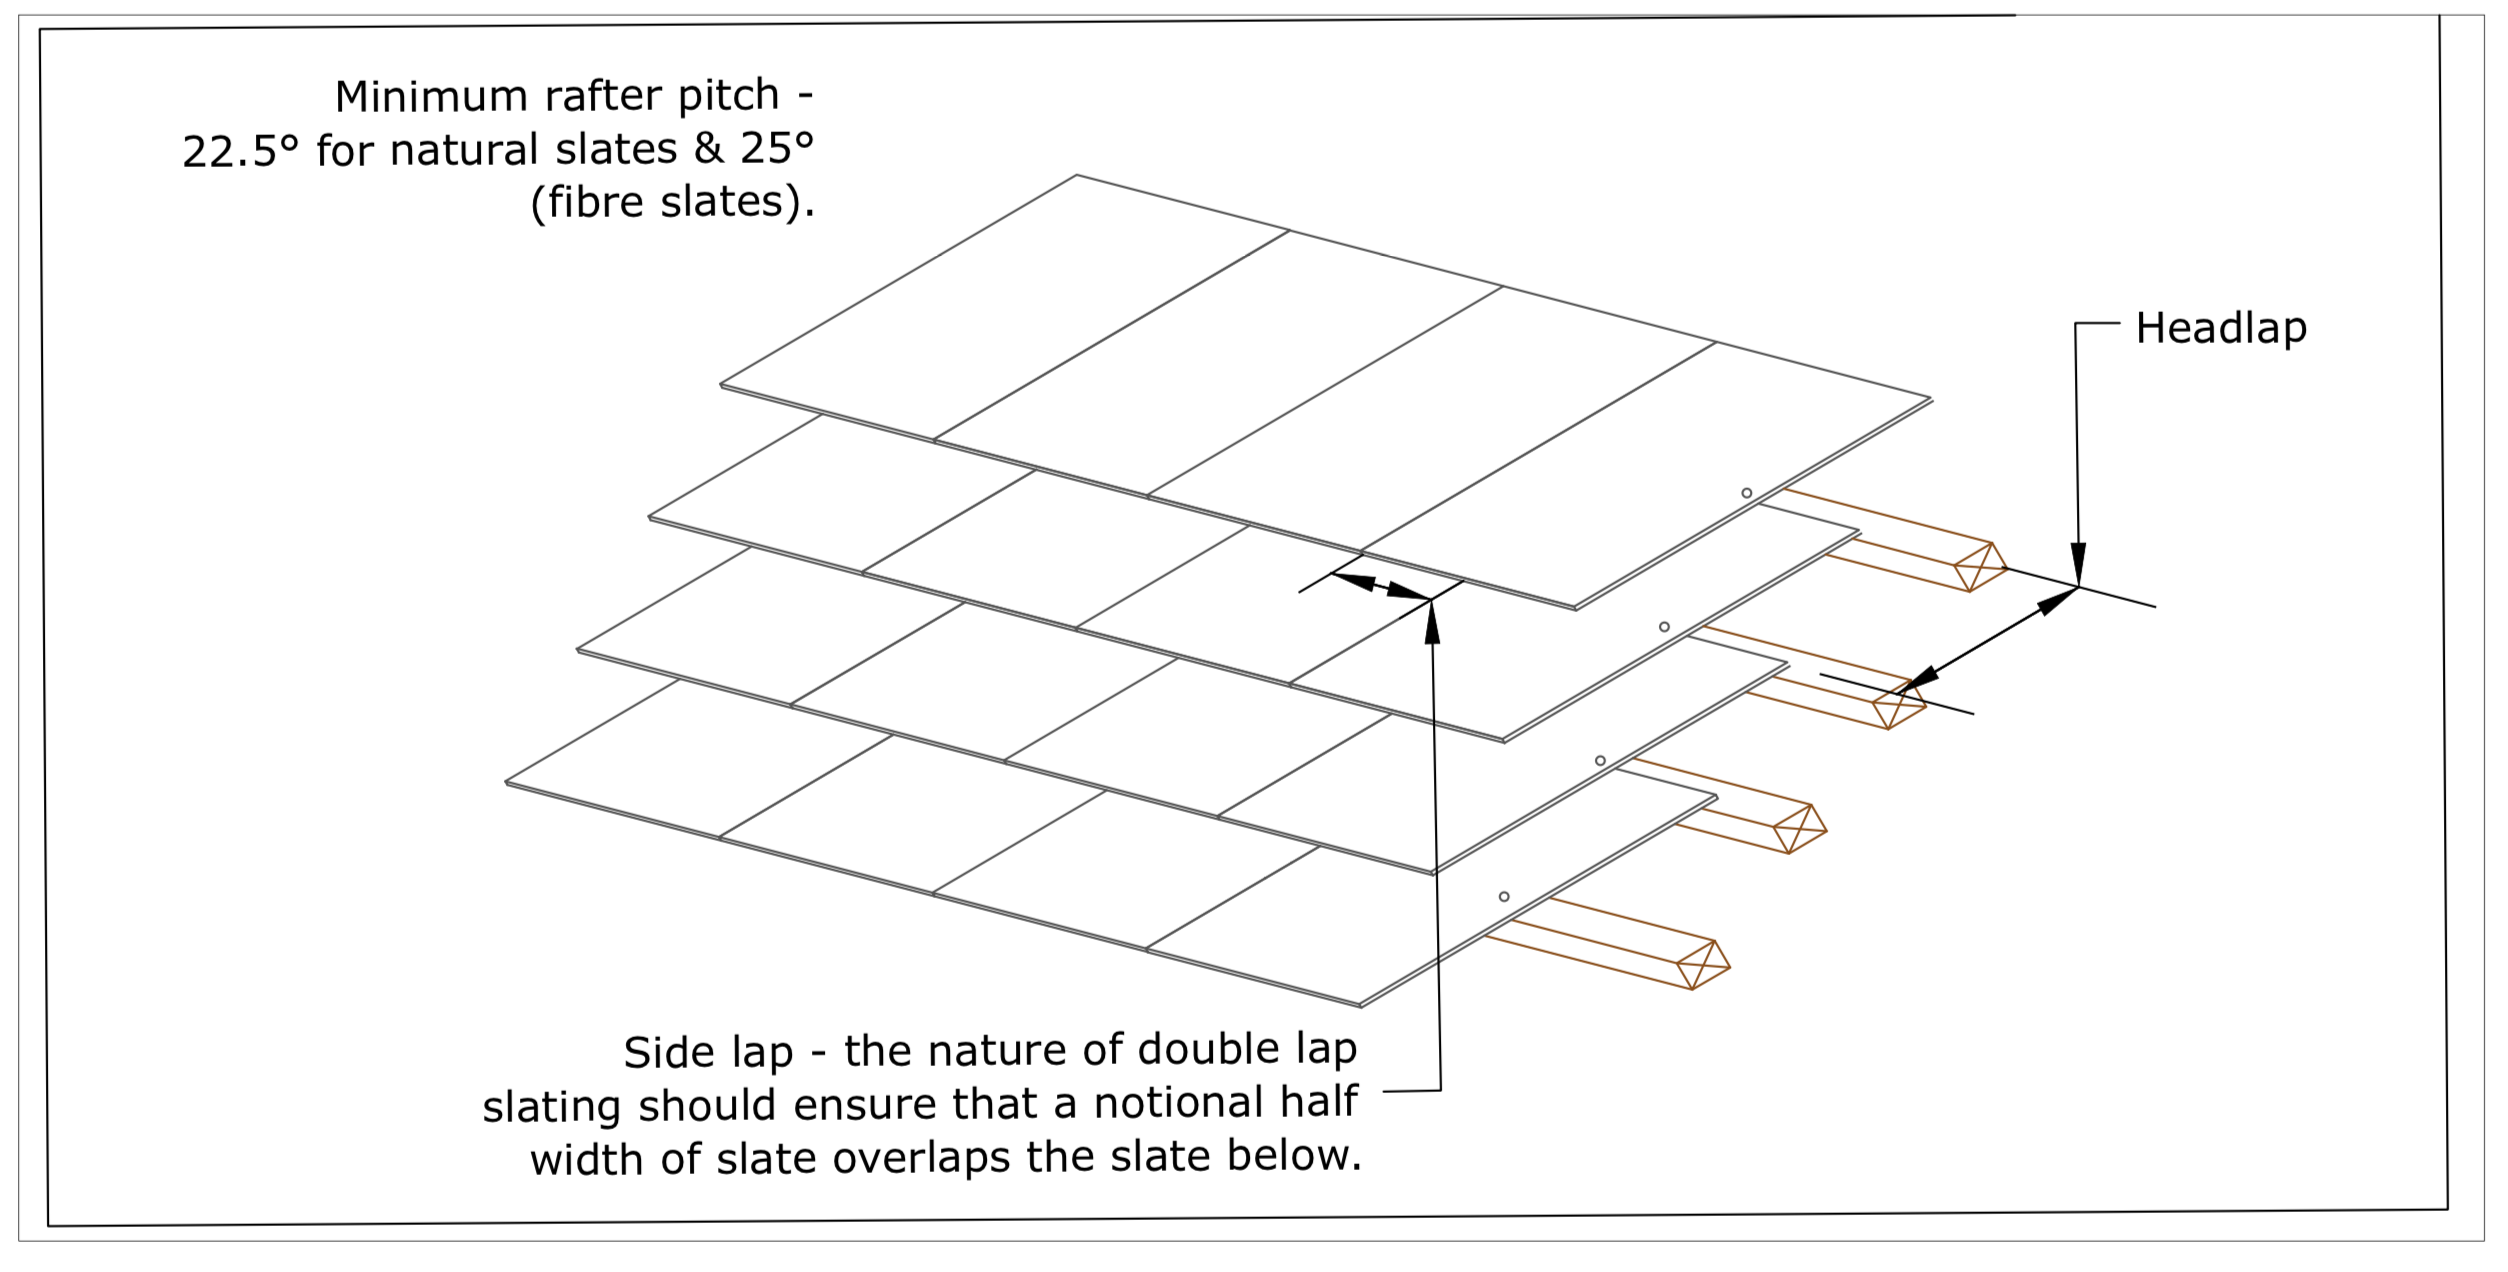 Diagram D94 - Fibre cement and natural slates side lap and min rafter pitch